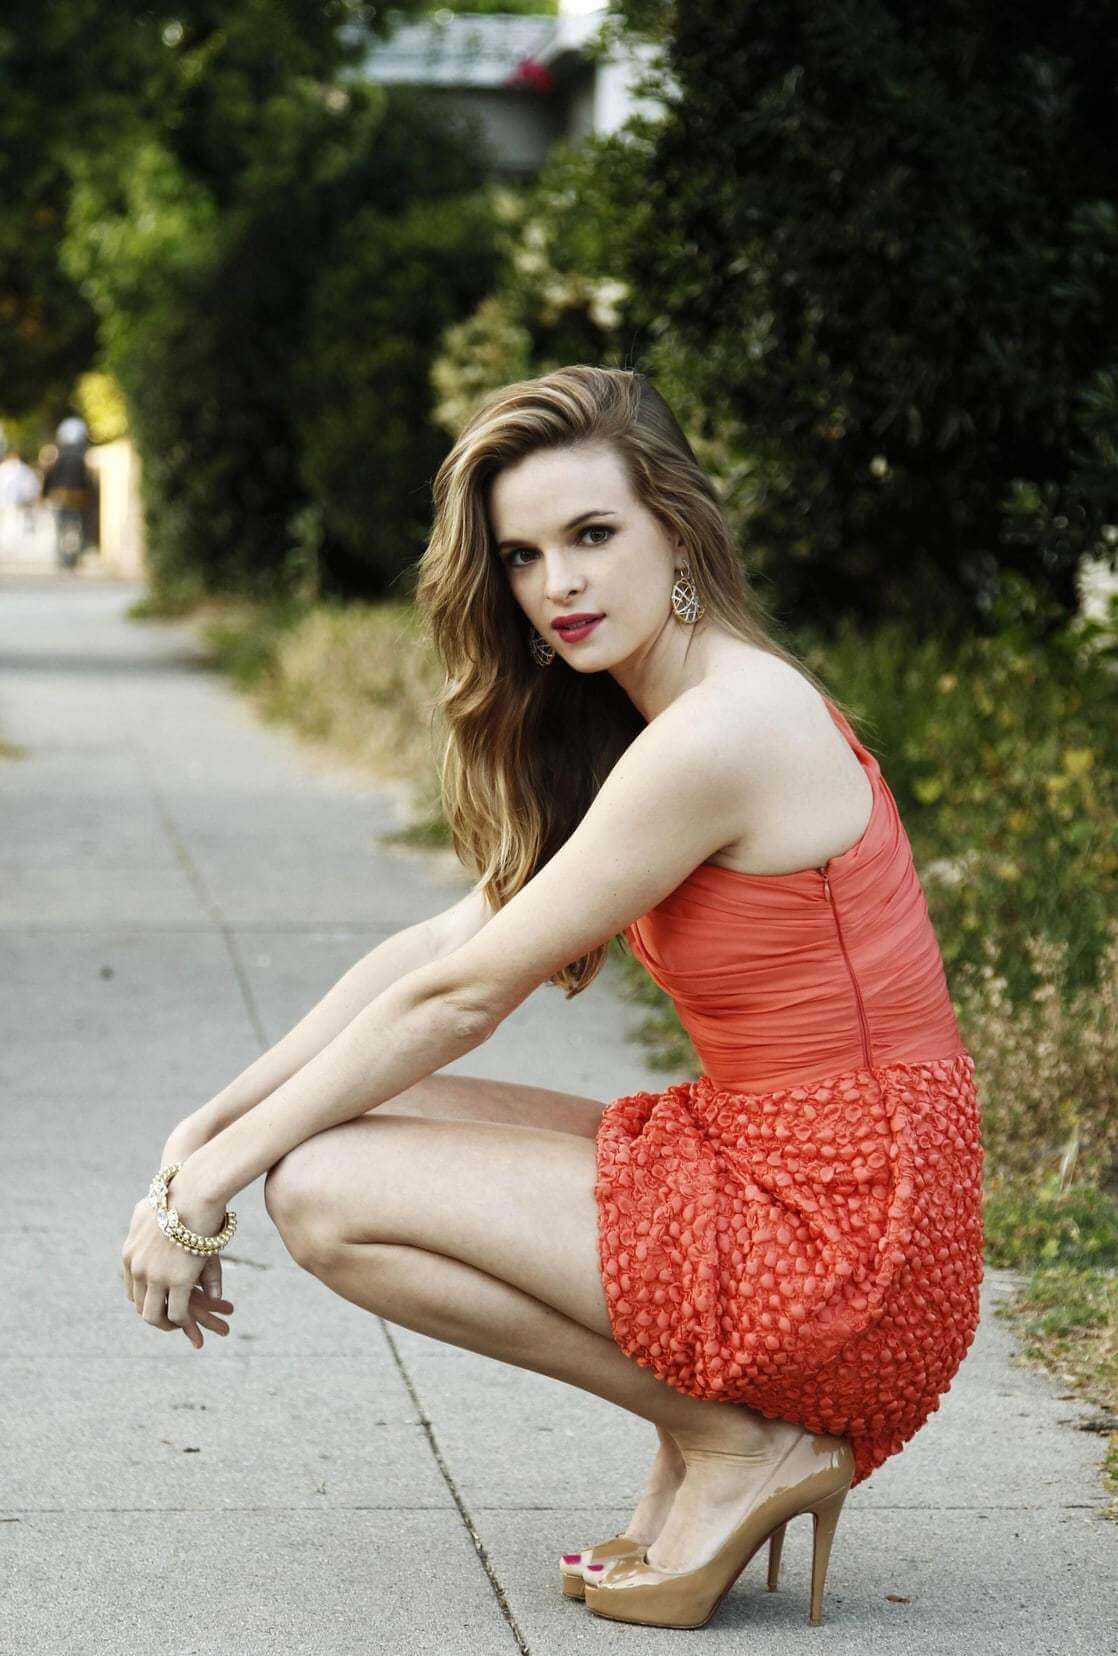 49 Hot Pictures Of Danielle Panabaker Which Will Make Your Mouth Water | Best Of Comic Books